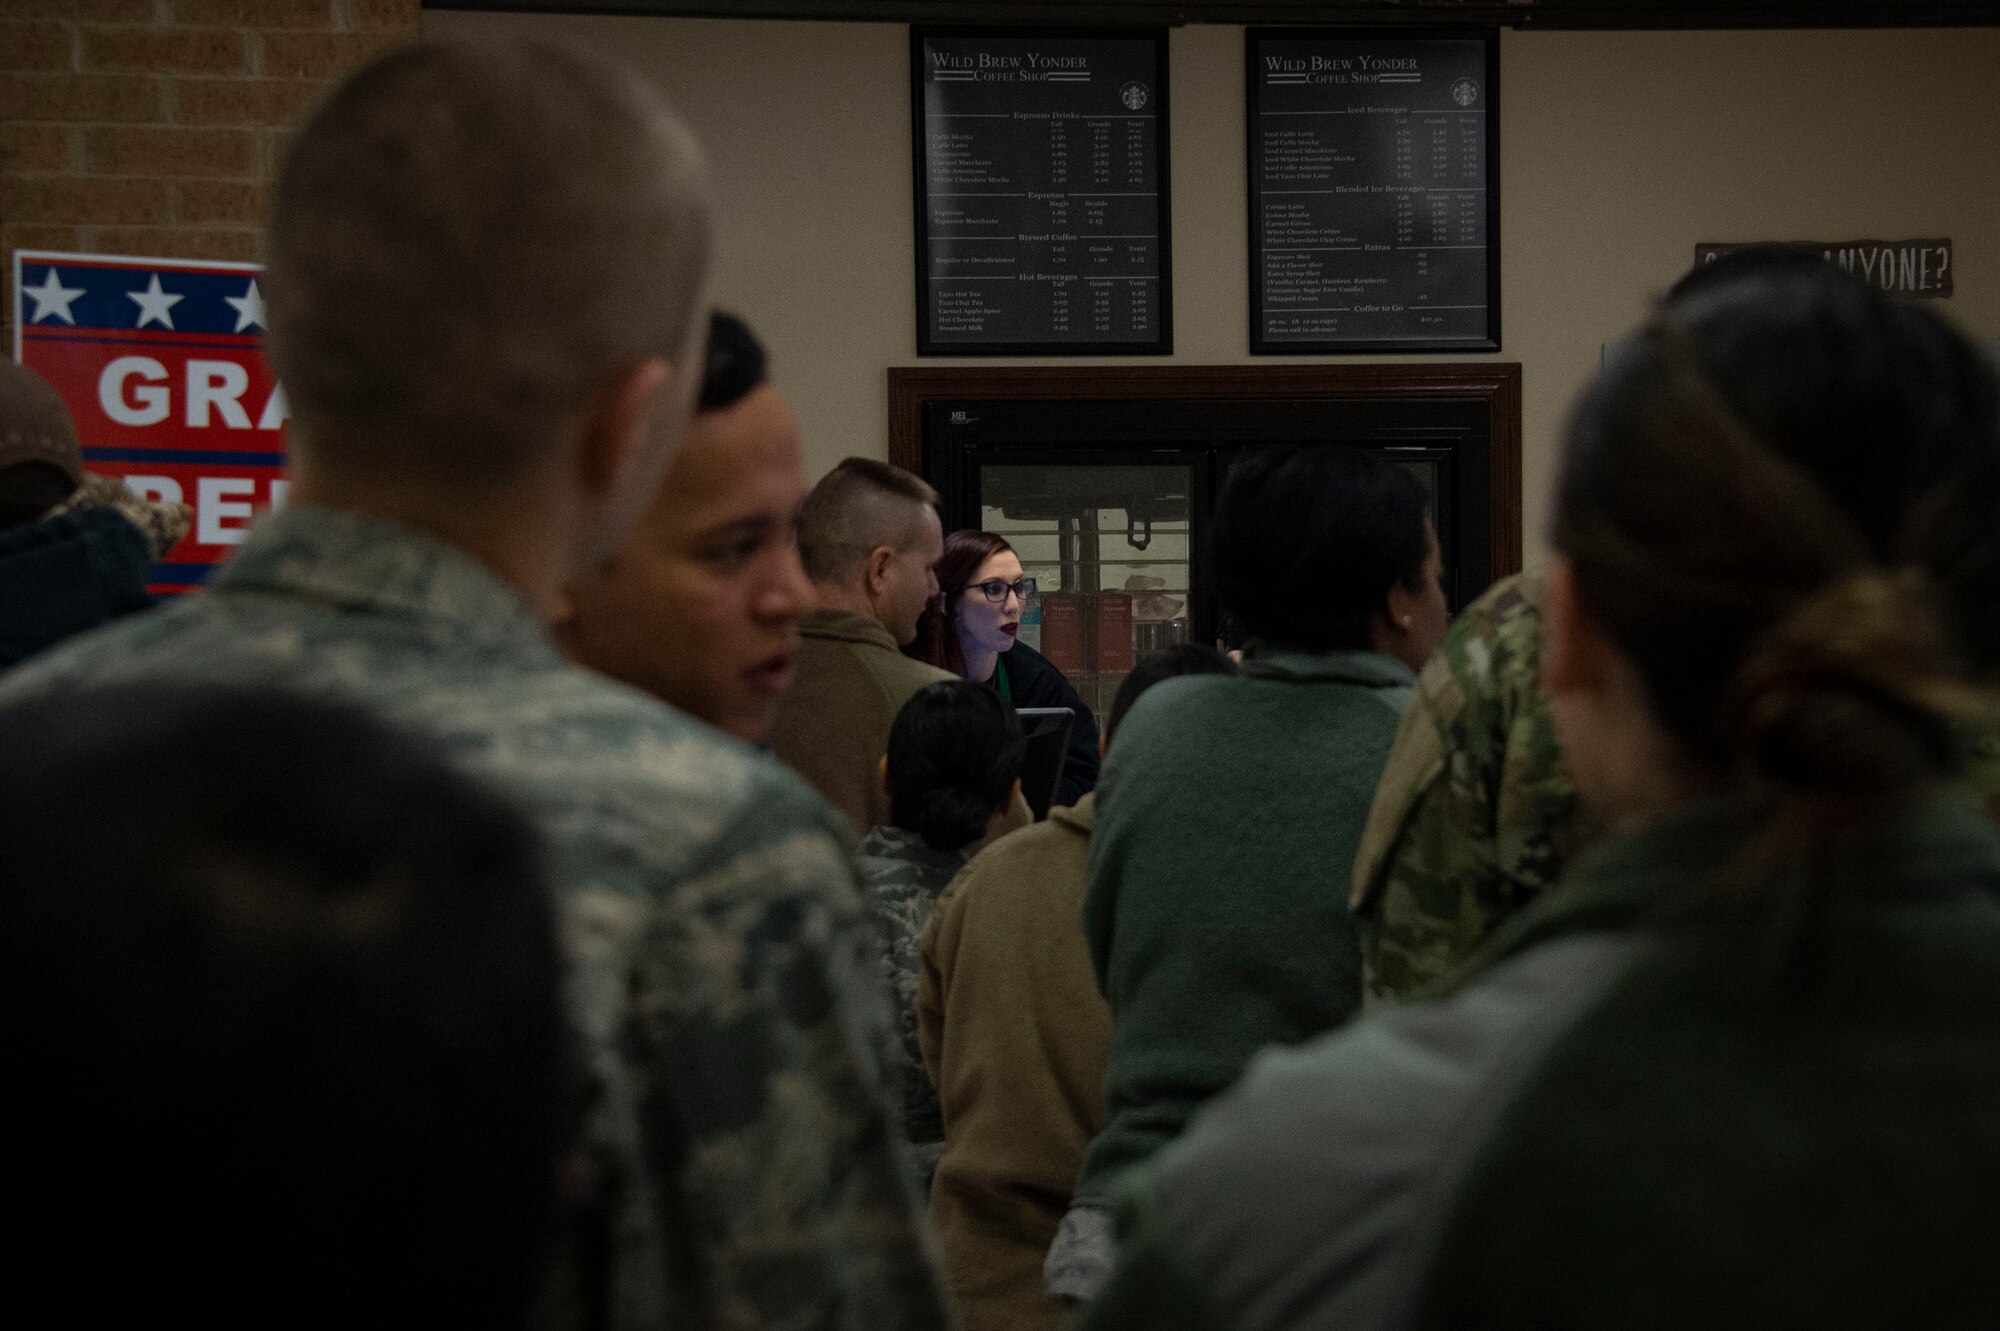 Airmen from the 97th Air Mobility Wing line up to order beverages from the new Wild Brew Yonder coffee shop, Feb. 29, 2019 at Altus Air Force Base, Okla.